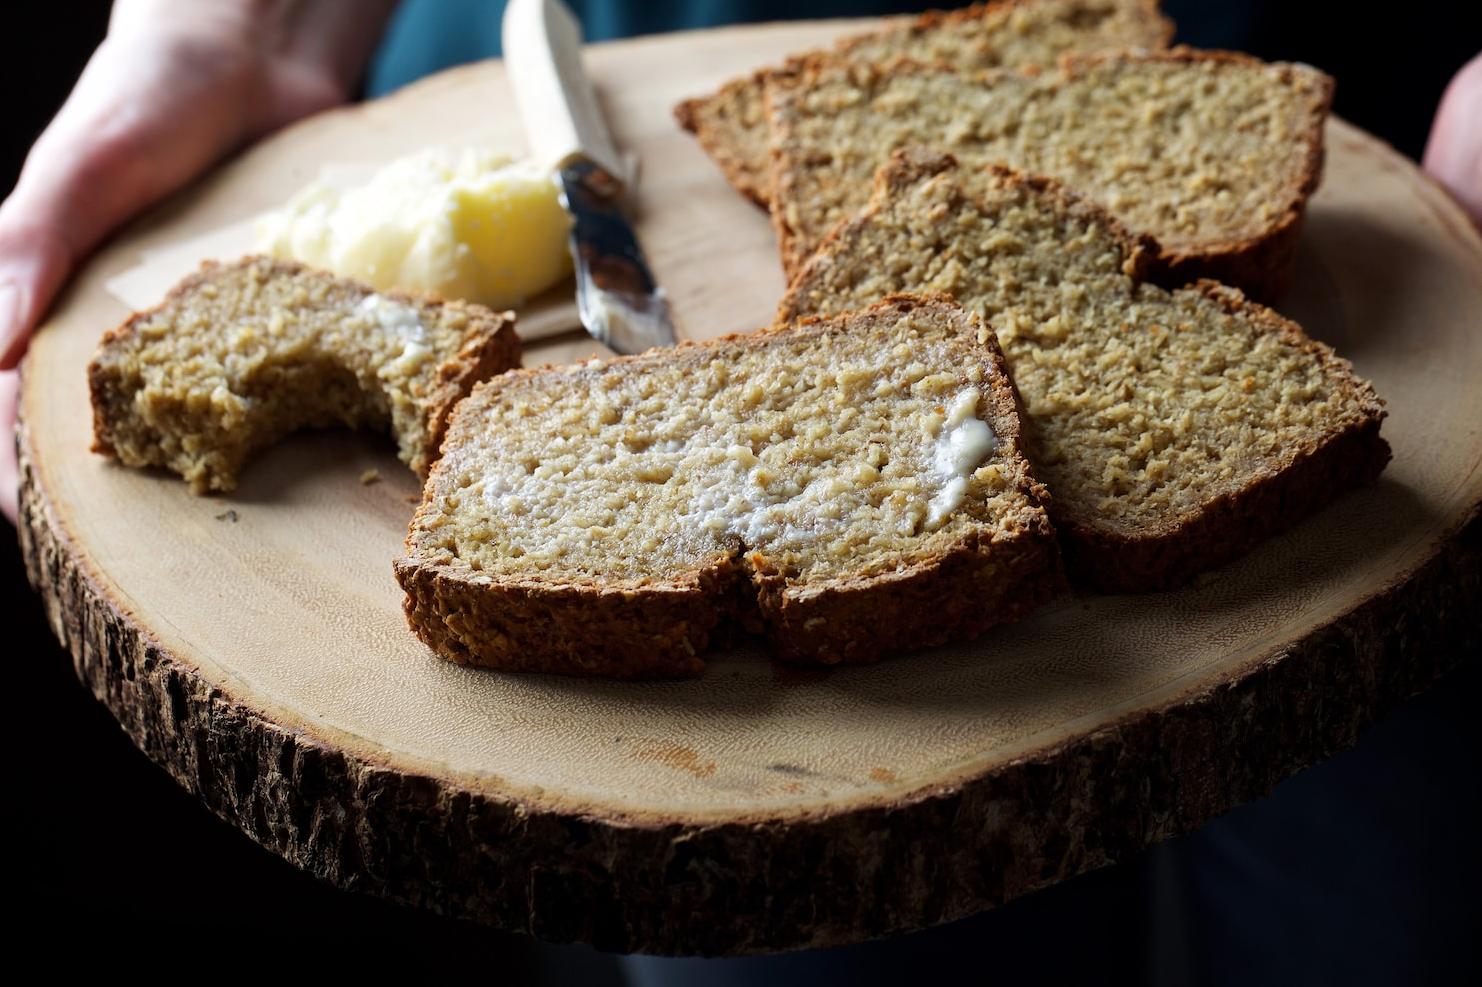  Warm slices of this bread are perfect to slather with butter or jam.